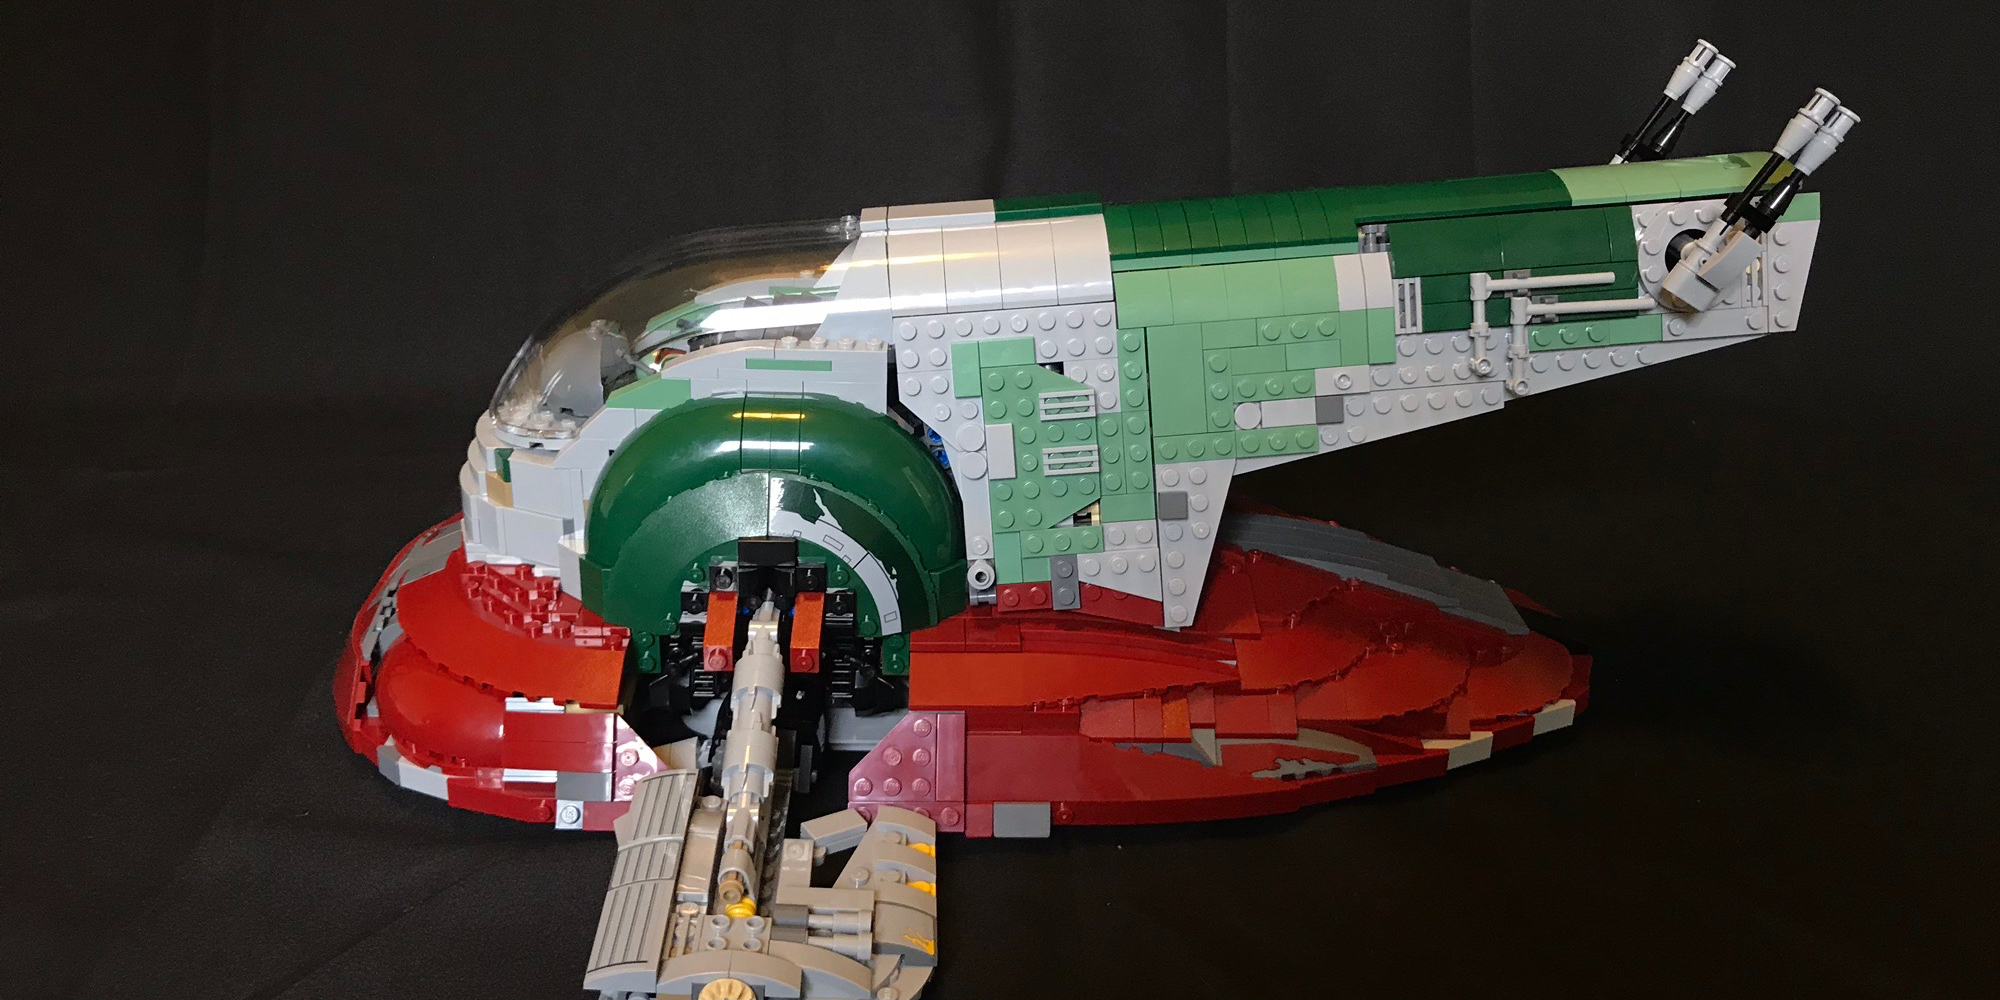 Review: LEGO Star Wars UCS Slave 1 packs 2,000 pieces and is the ultimate display model